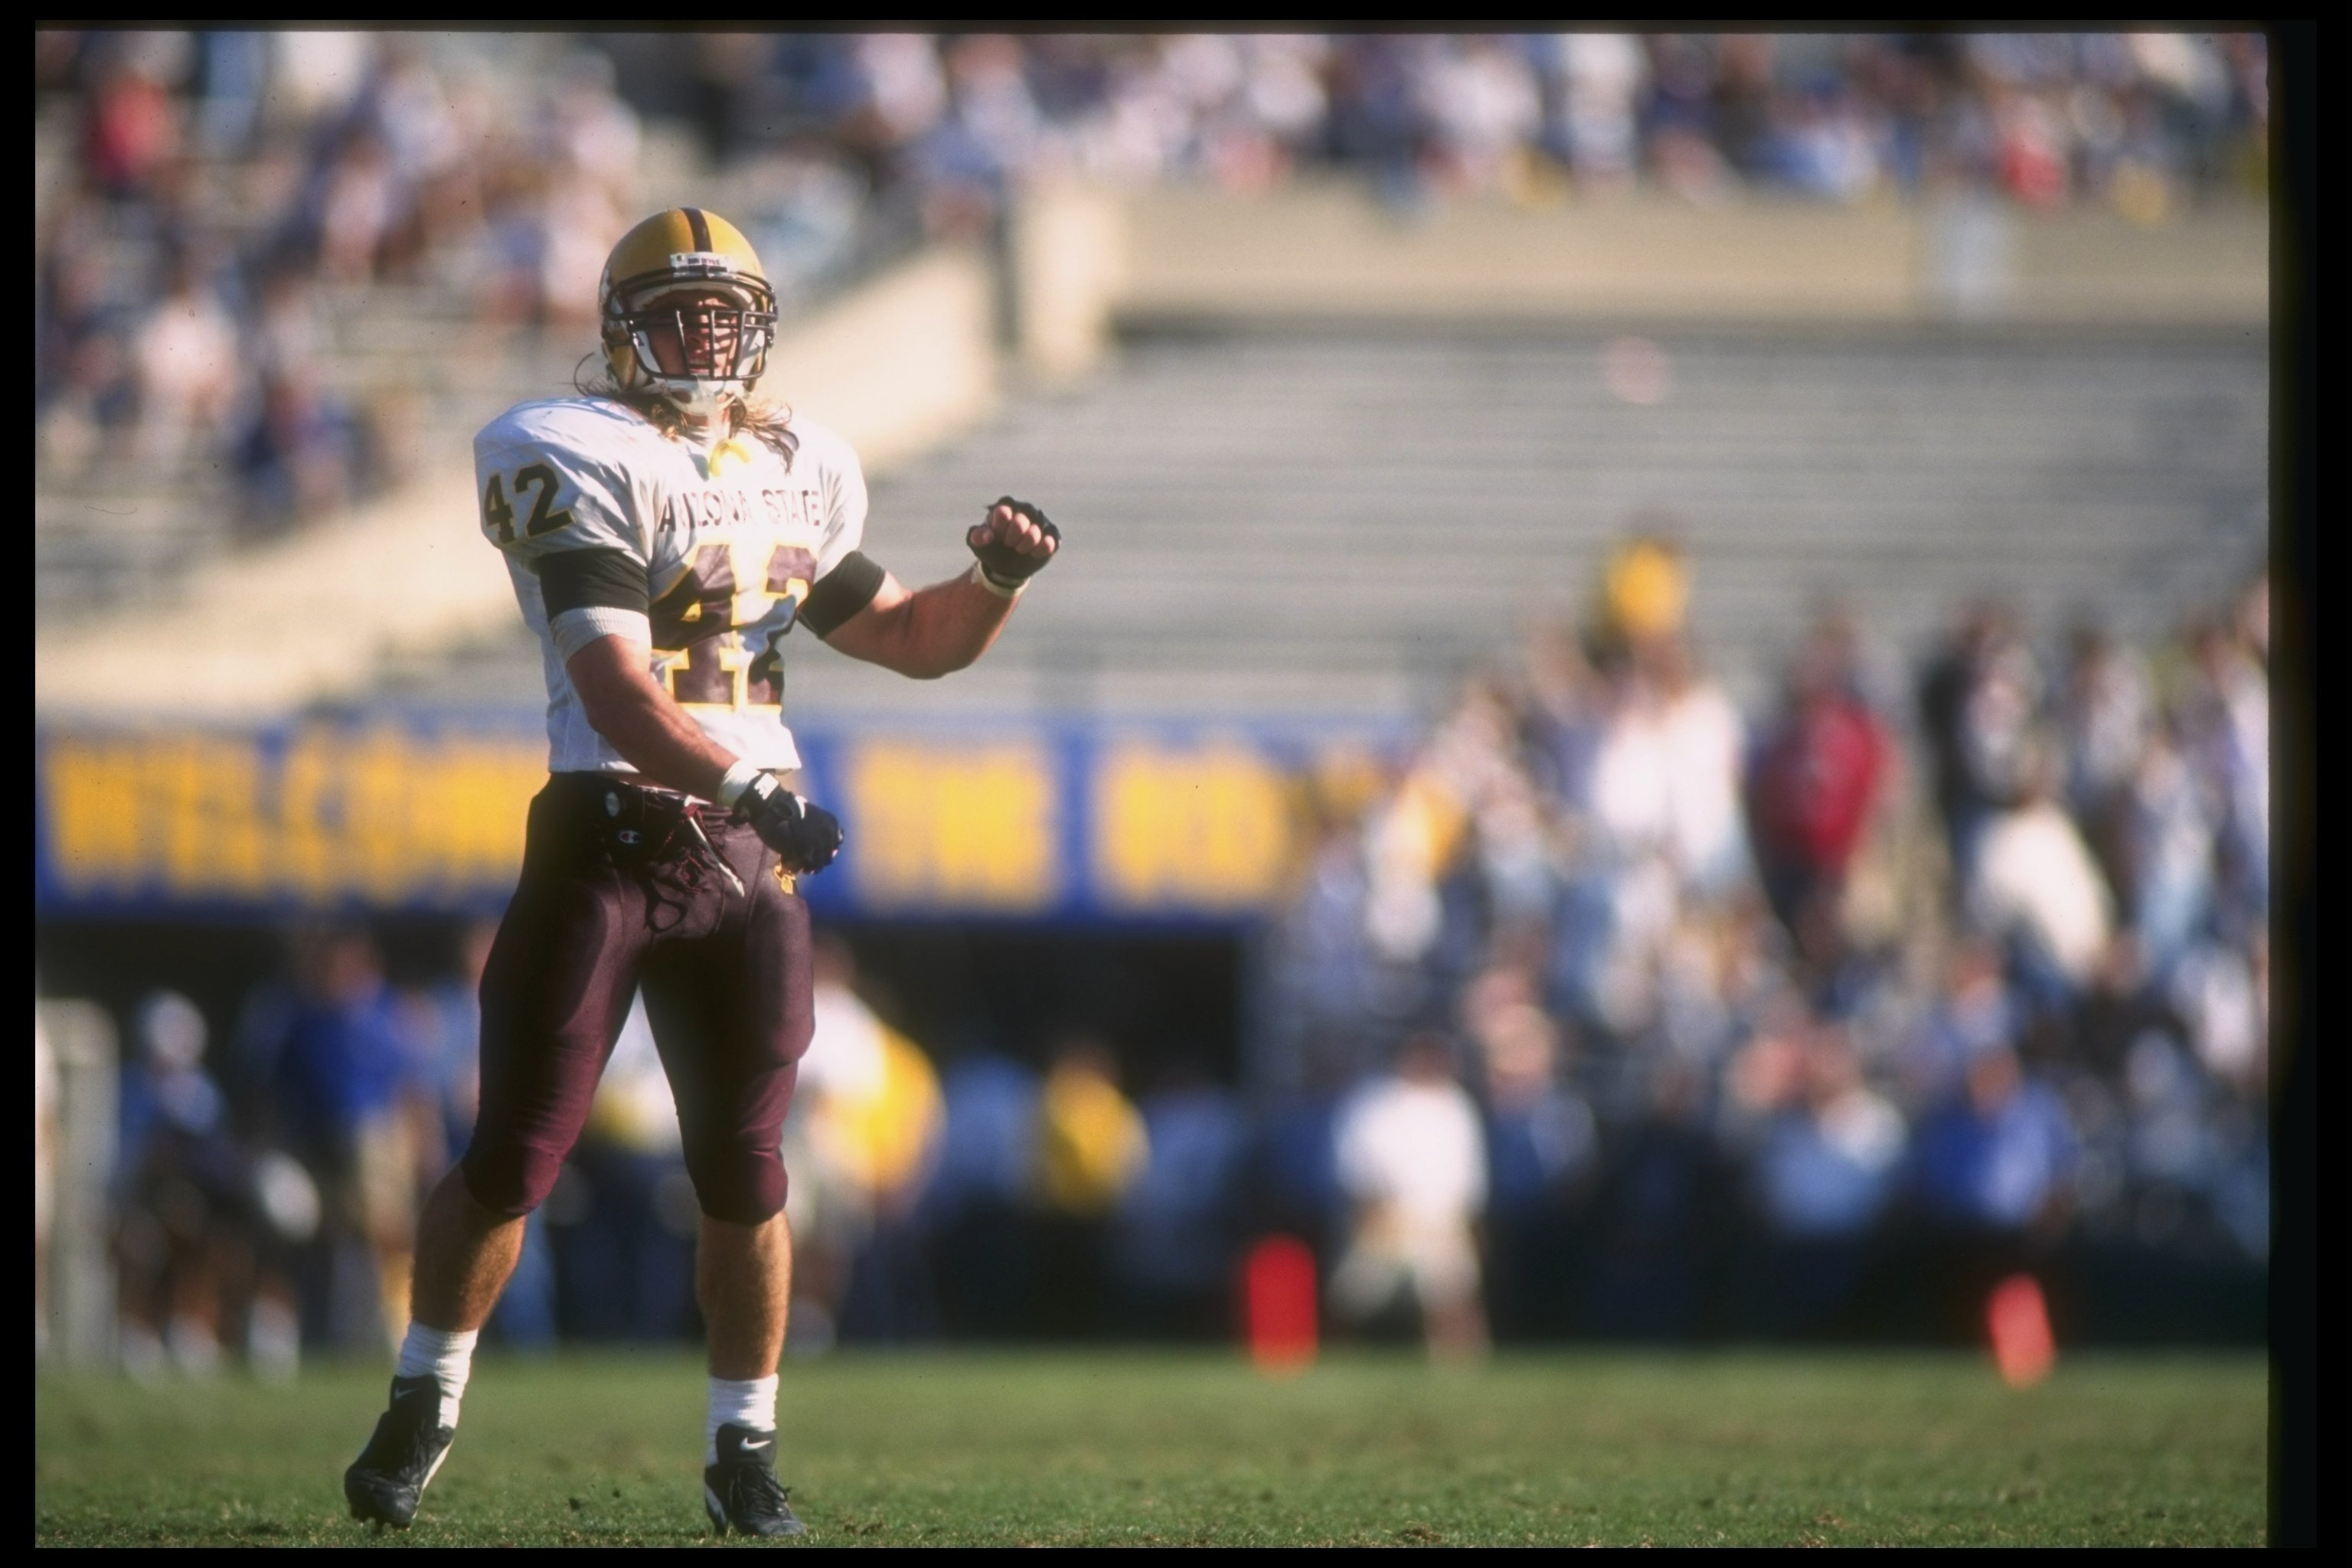 NFL icon Pat Tillman joined army after 9/11 and was killed in